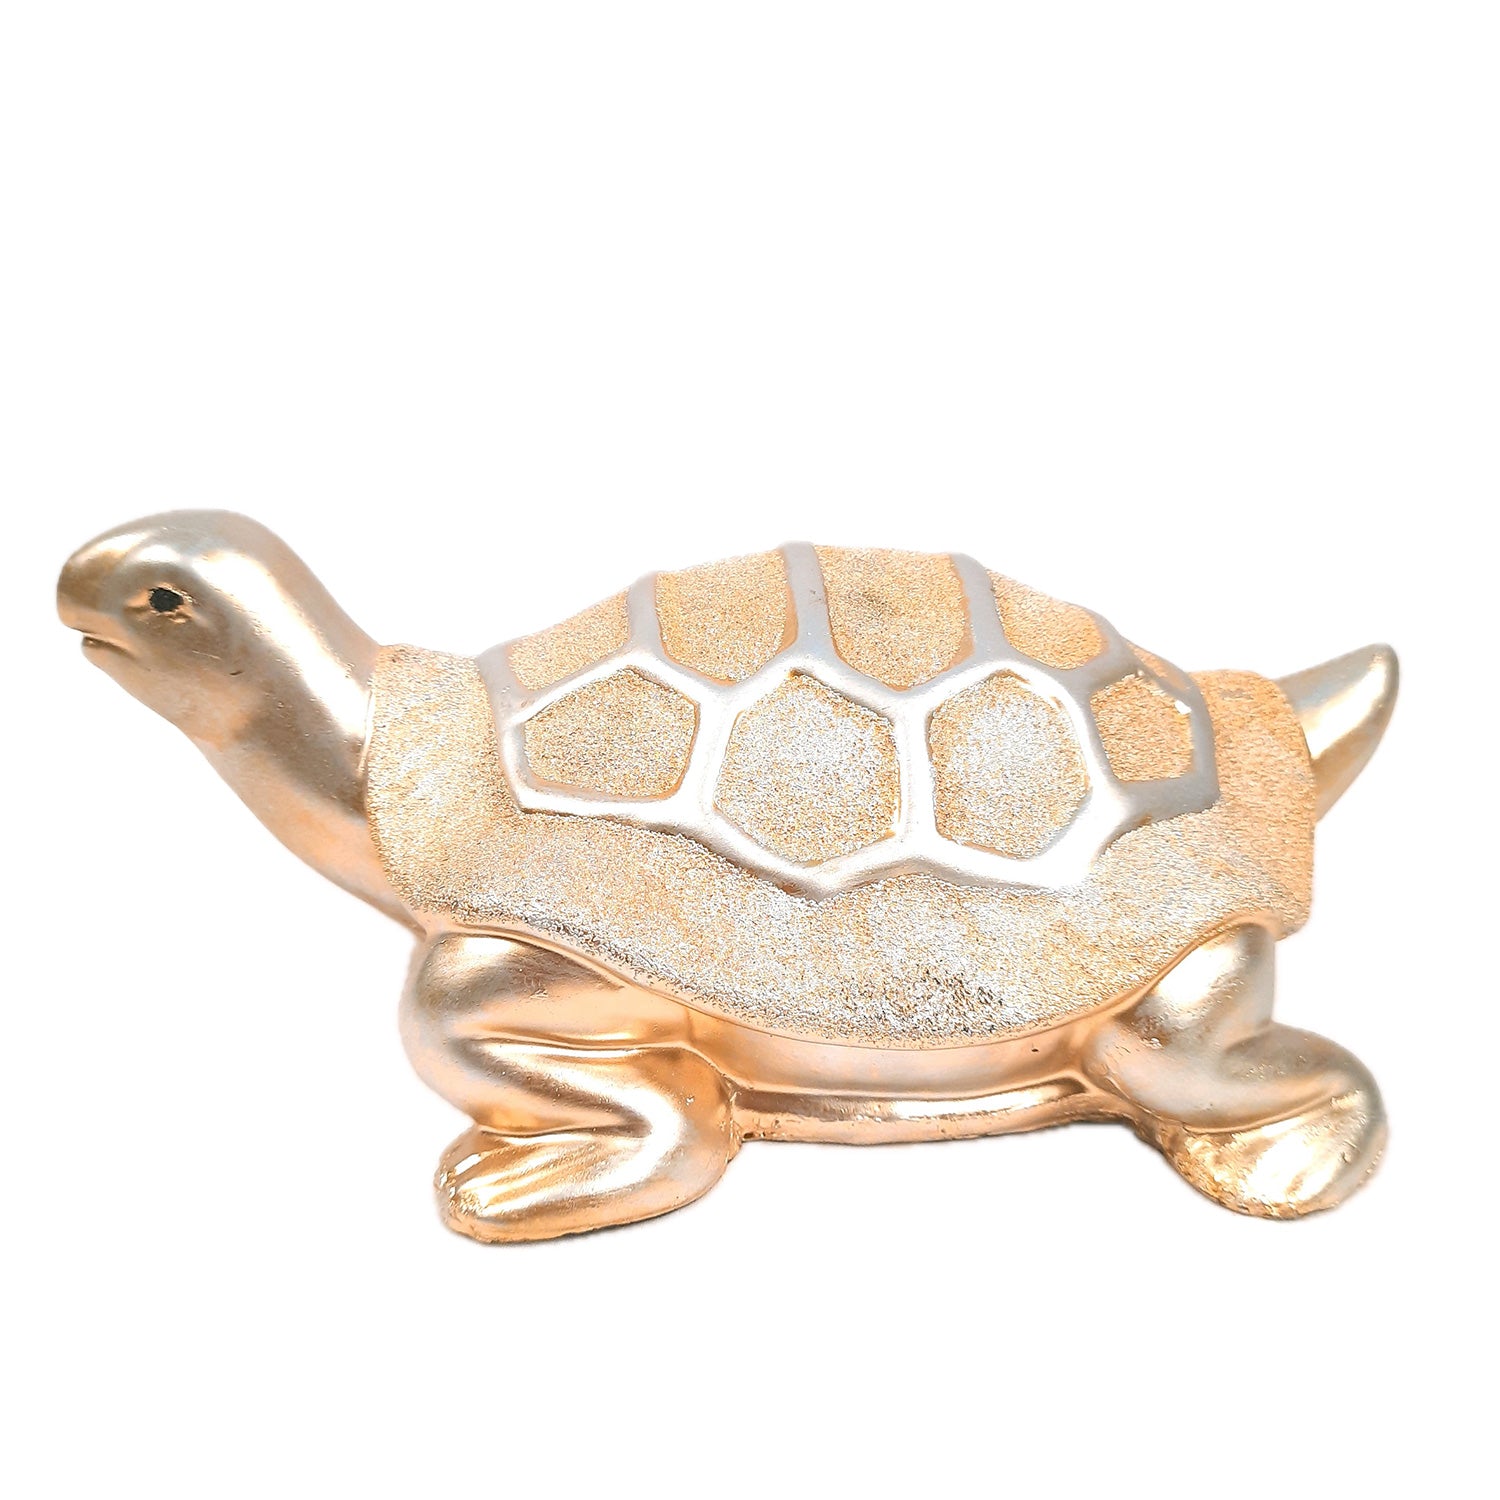 Feng Shui Tortoise Showpiece Set for Good Luck | Turtle Figurines for Good Luck & Positive Energy - For Home Decor, Living Room, Office & Gift Success - Apkamart #Style_Style 1